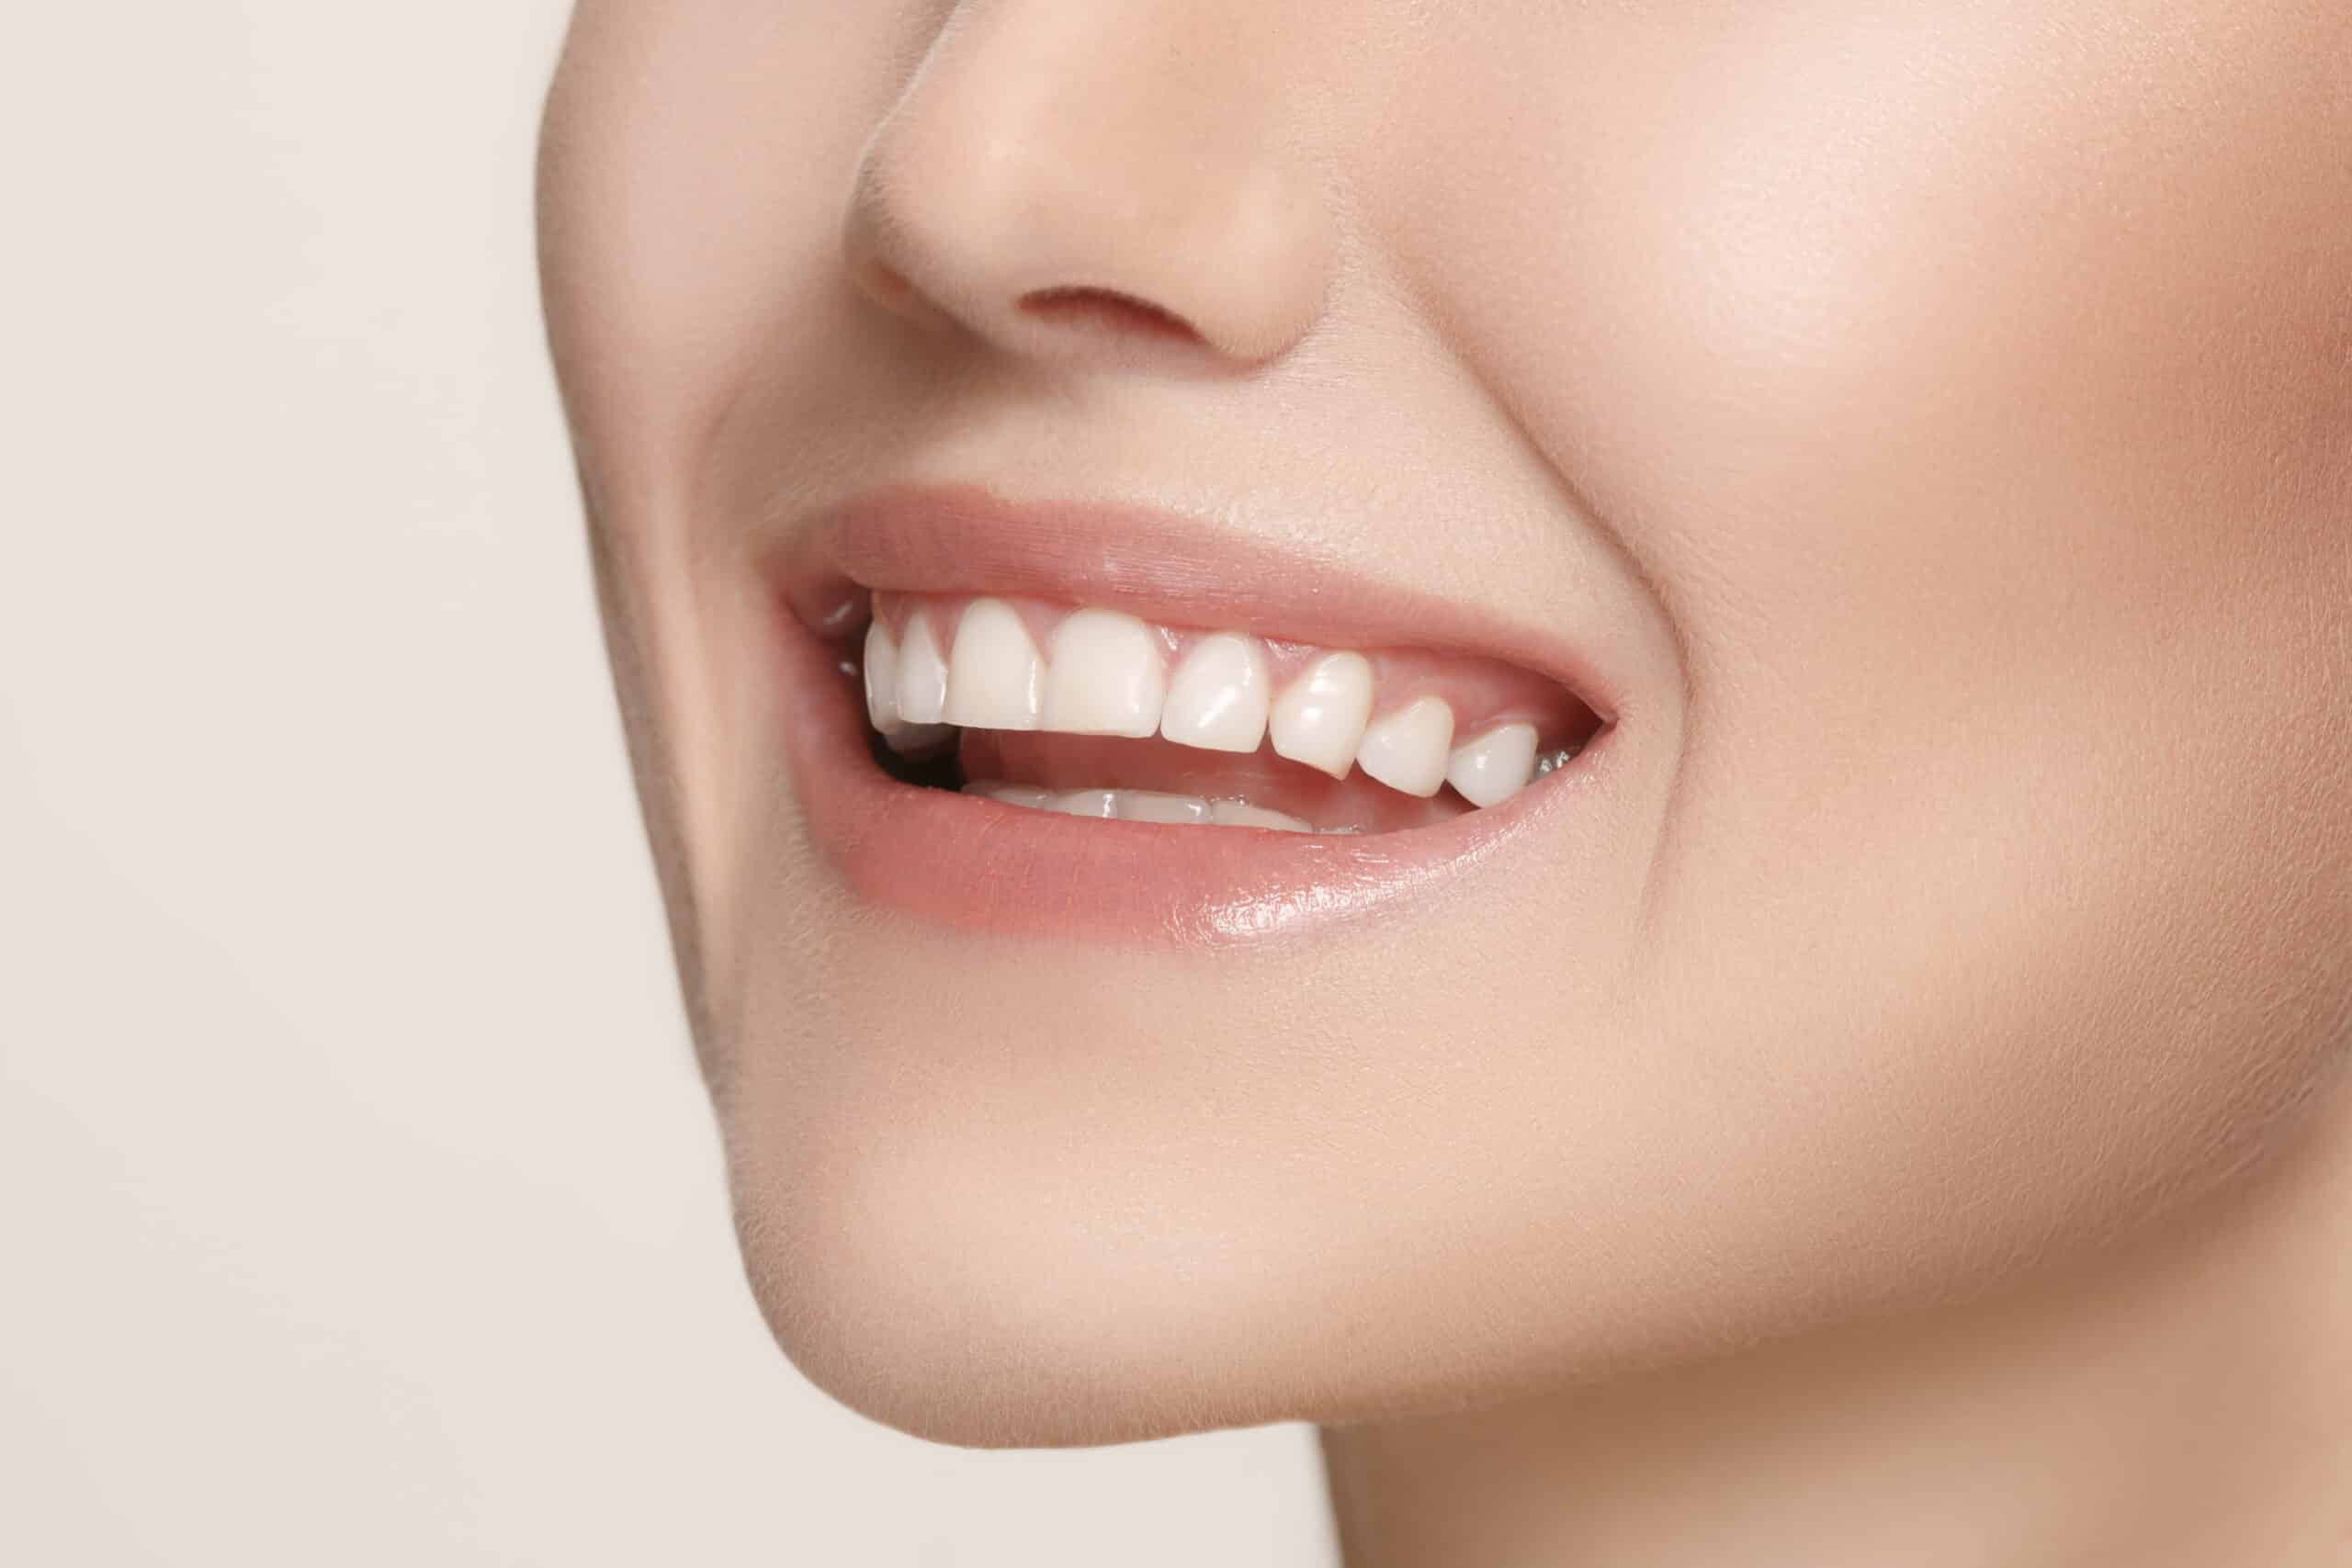 Cosmetic dentistry focuses on enhancing the aesthetics of your smile, so you can feel confident.